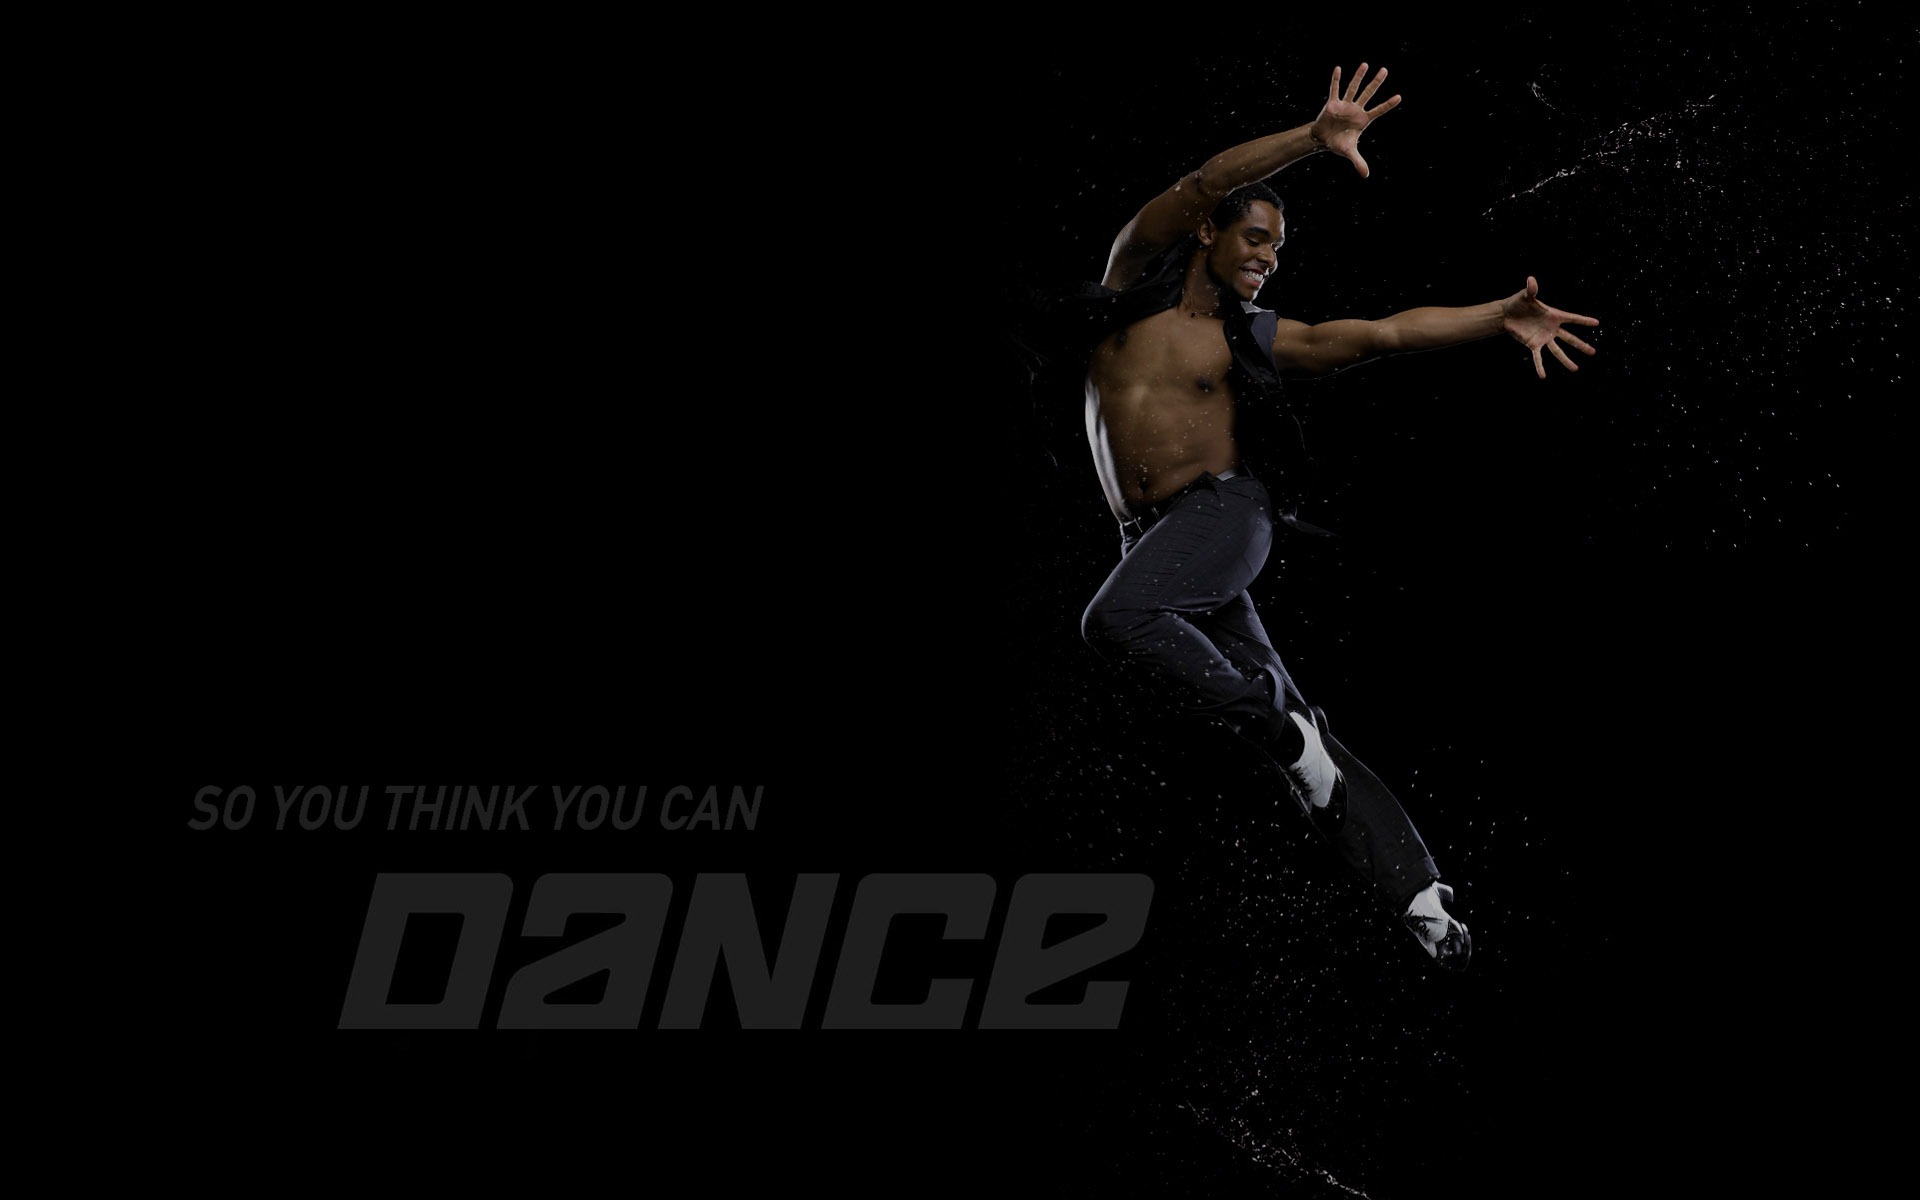 So You Think You Can Dance wallpaper (2) #20 - 1920x1200